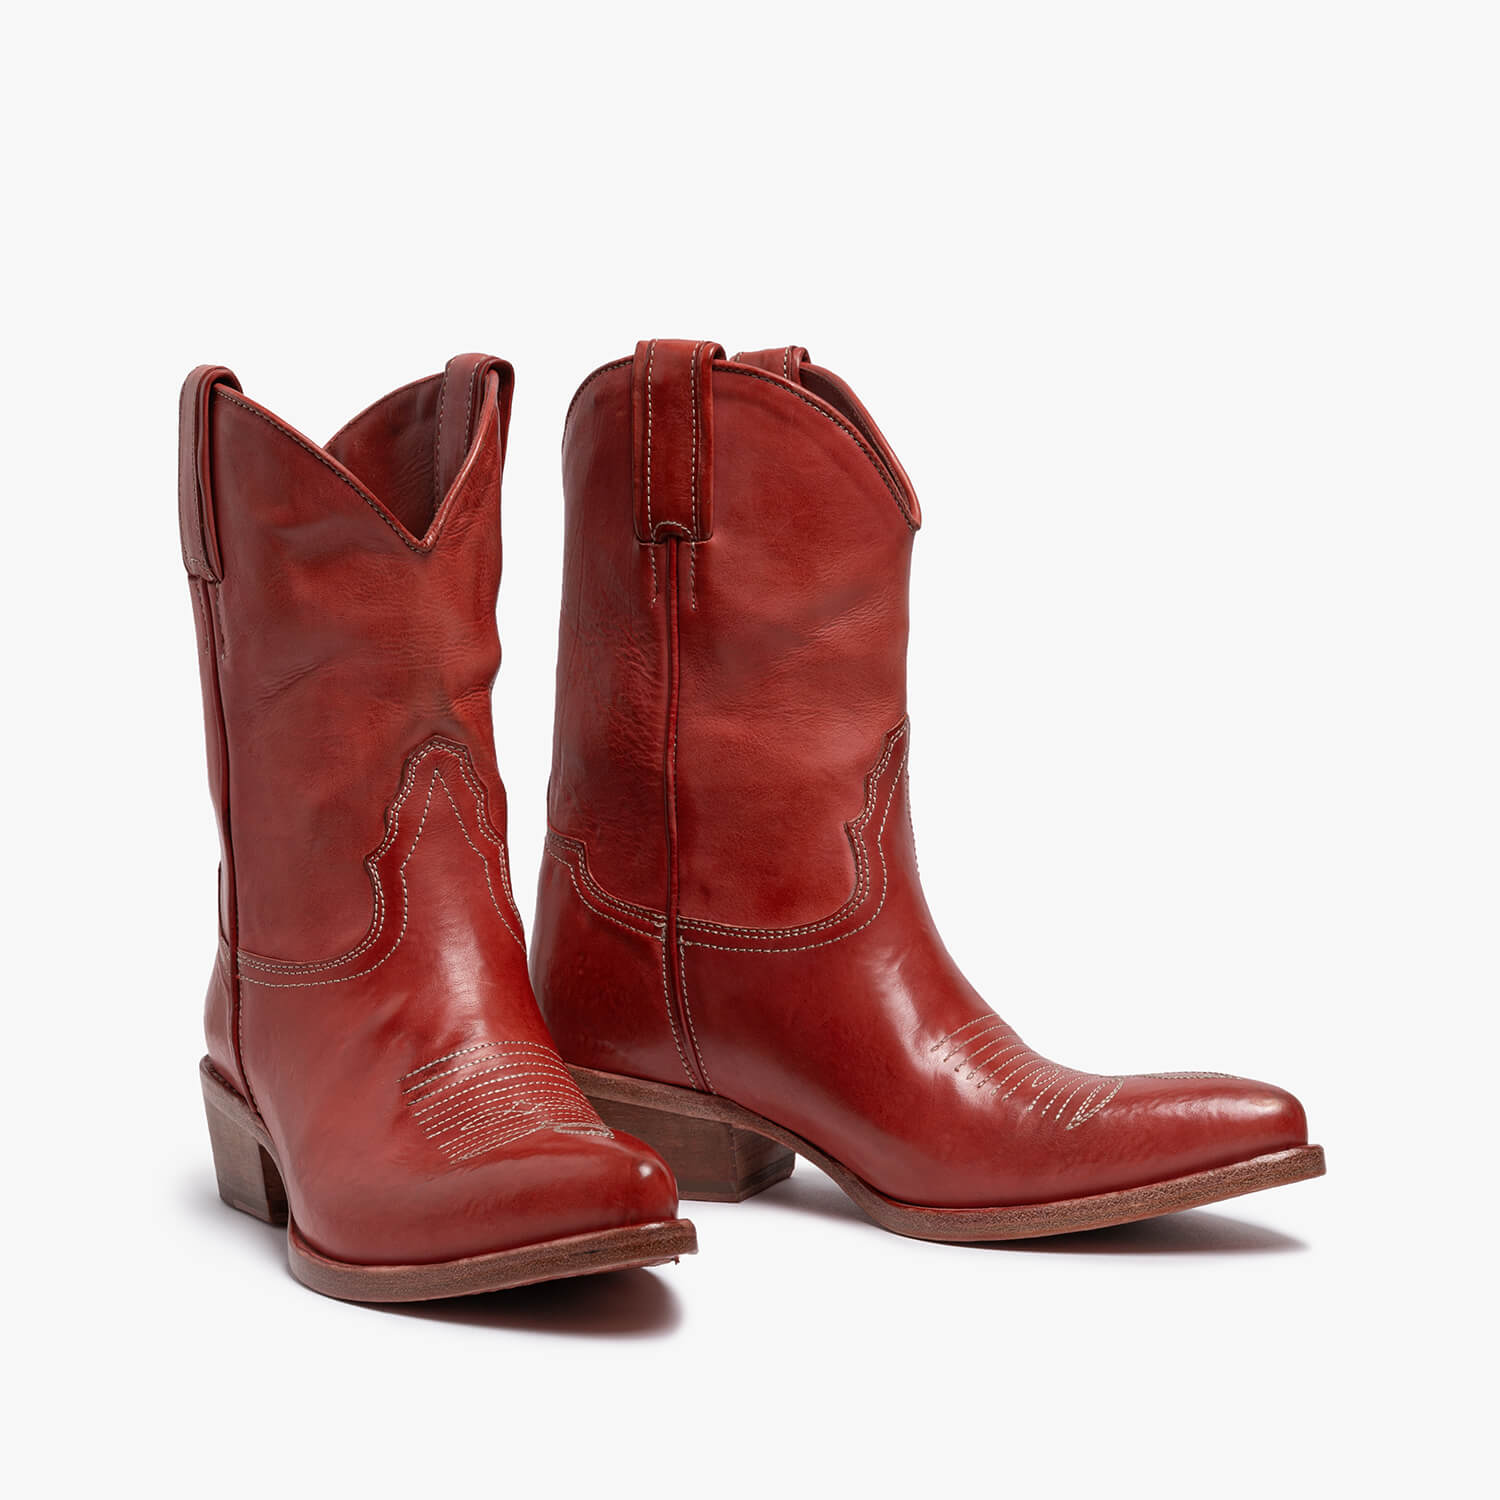 Alessandra | Calf leather red mid Texan boot